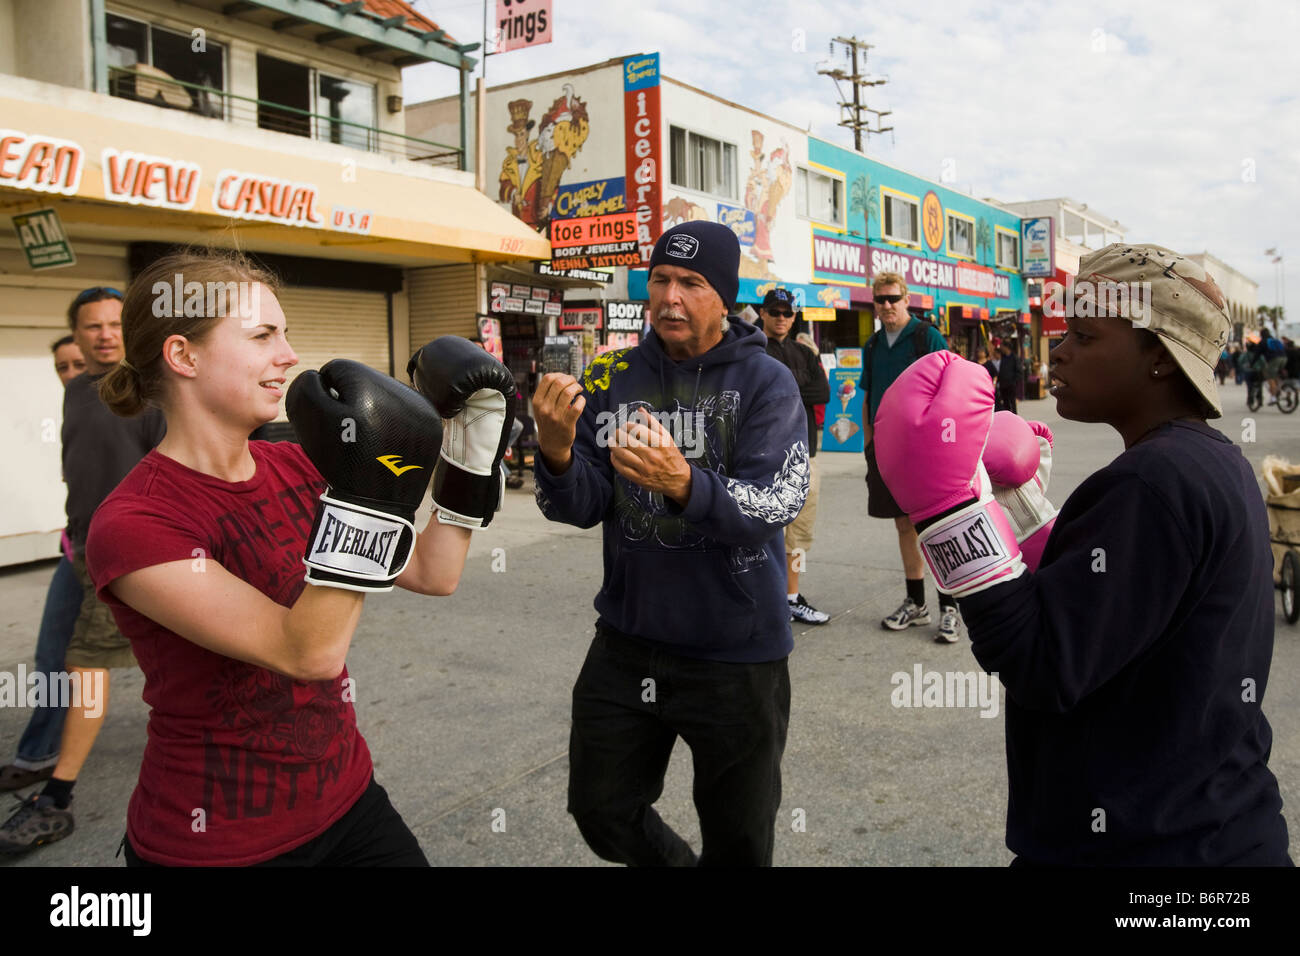 Two Woman Learning to Box Venice Beach Los Angeles County California United States of America Stock Photo